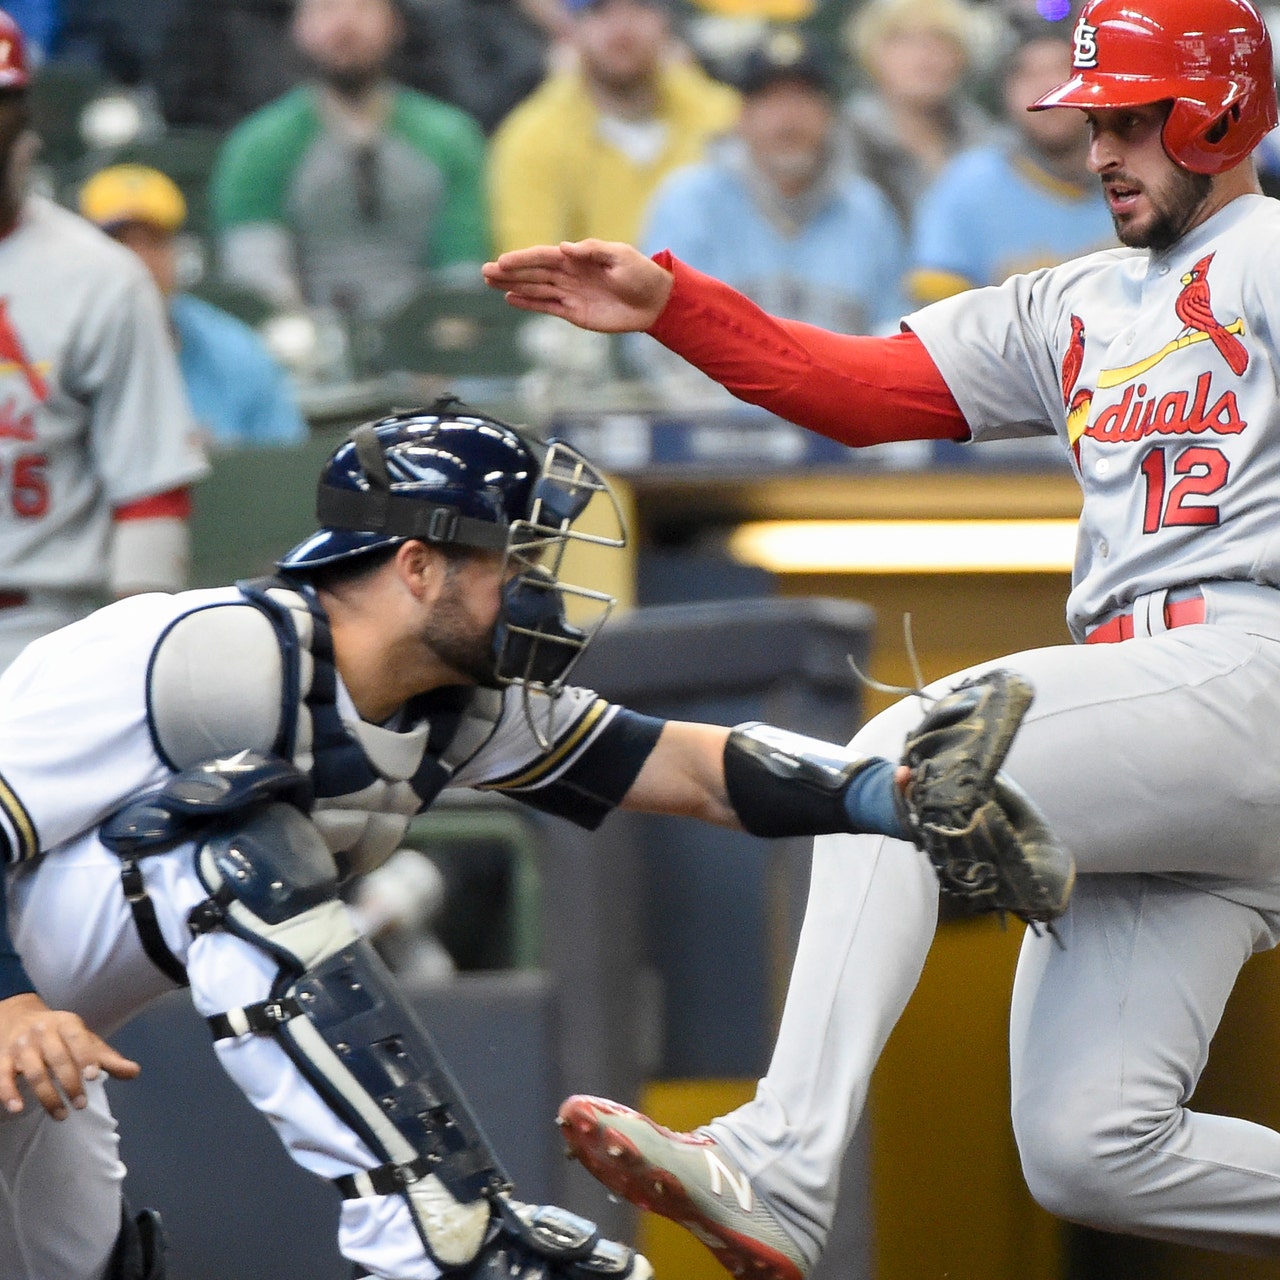 Cardinals-Brewers game Wednesday airs on FS1 FOX Sports